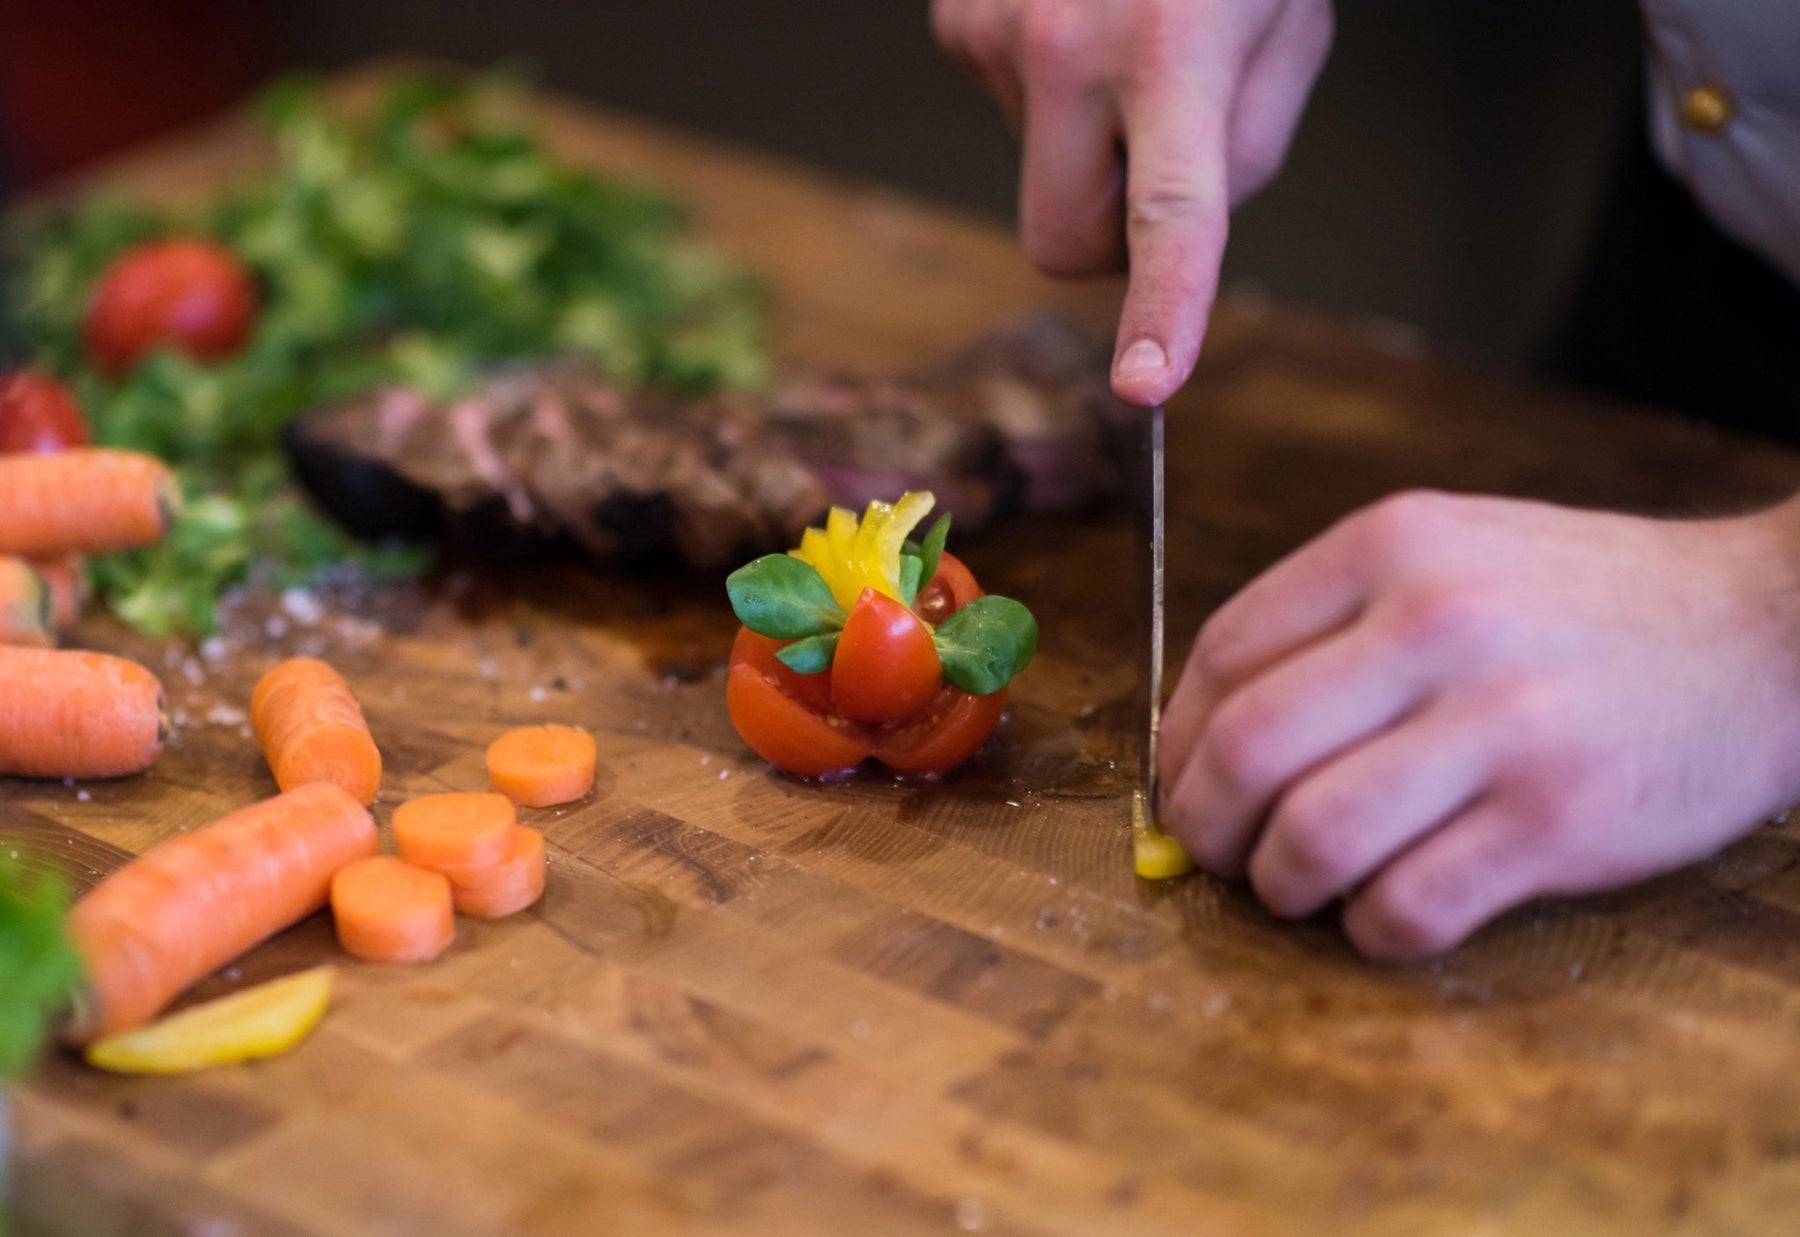 How to Hold a Chef's Knife: Get Better Control and Ergonomics - Kakushin